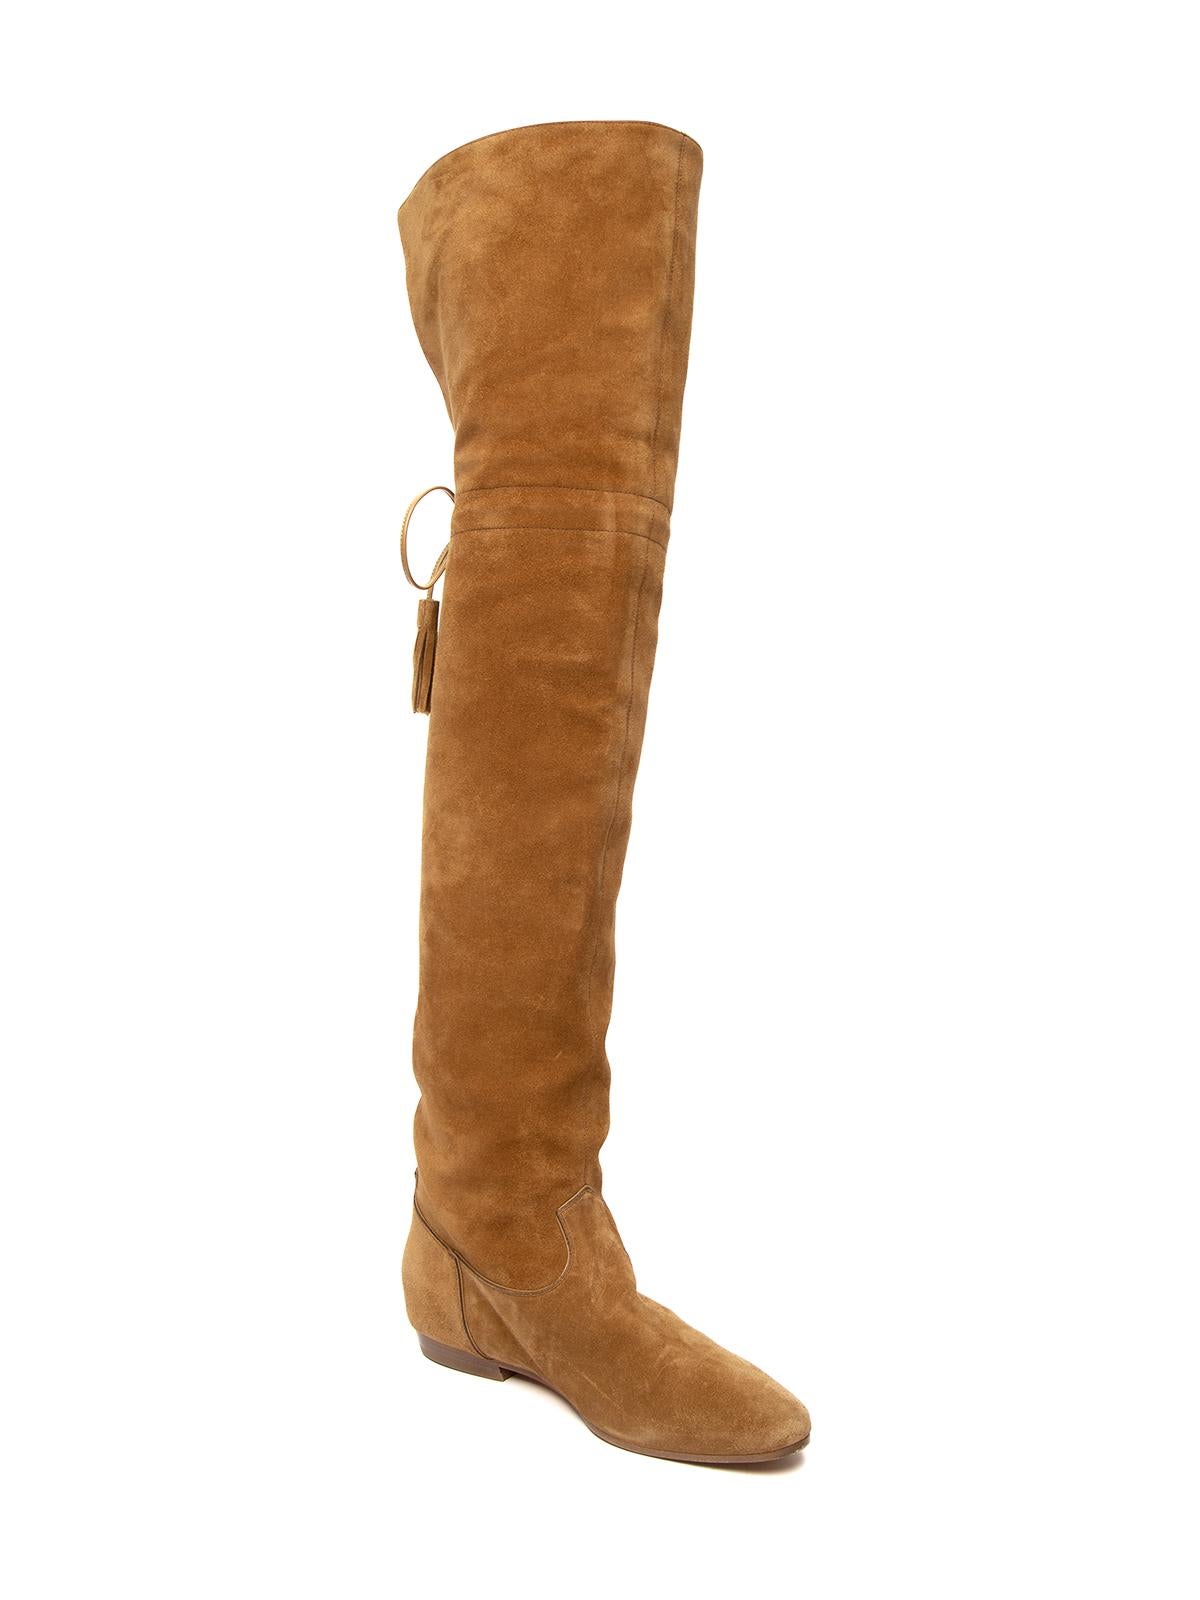 CONDITION is Good. Some wear to boots is evident. Minor signs of wear on soles, suede around to toe box and heel on this used Celine designer resale item. Details Suede Camel Flat boot Over the knee Almond toe Tassel ties at knees Made in Italy